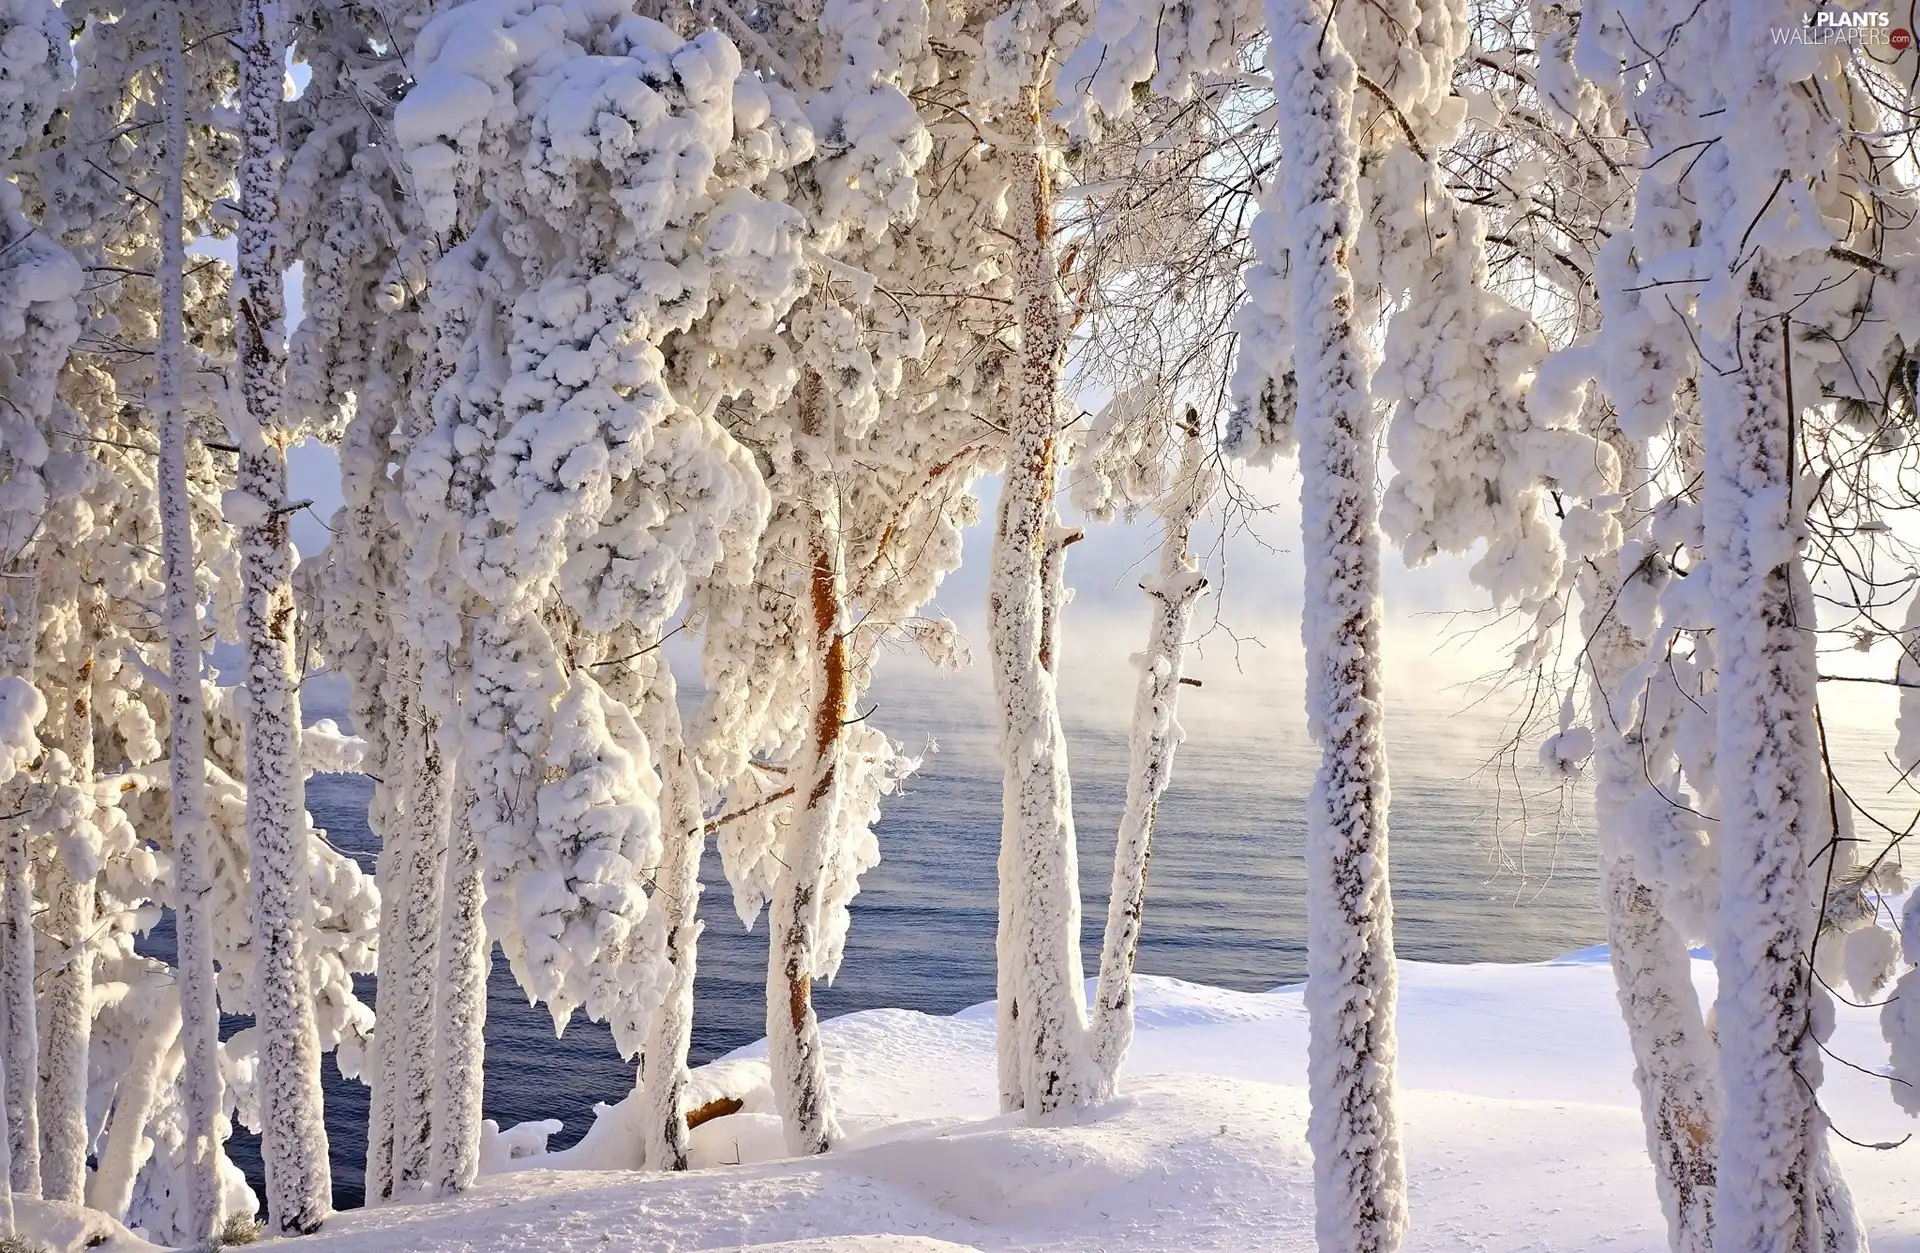 Snowy, viewes, water, trees